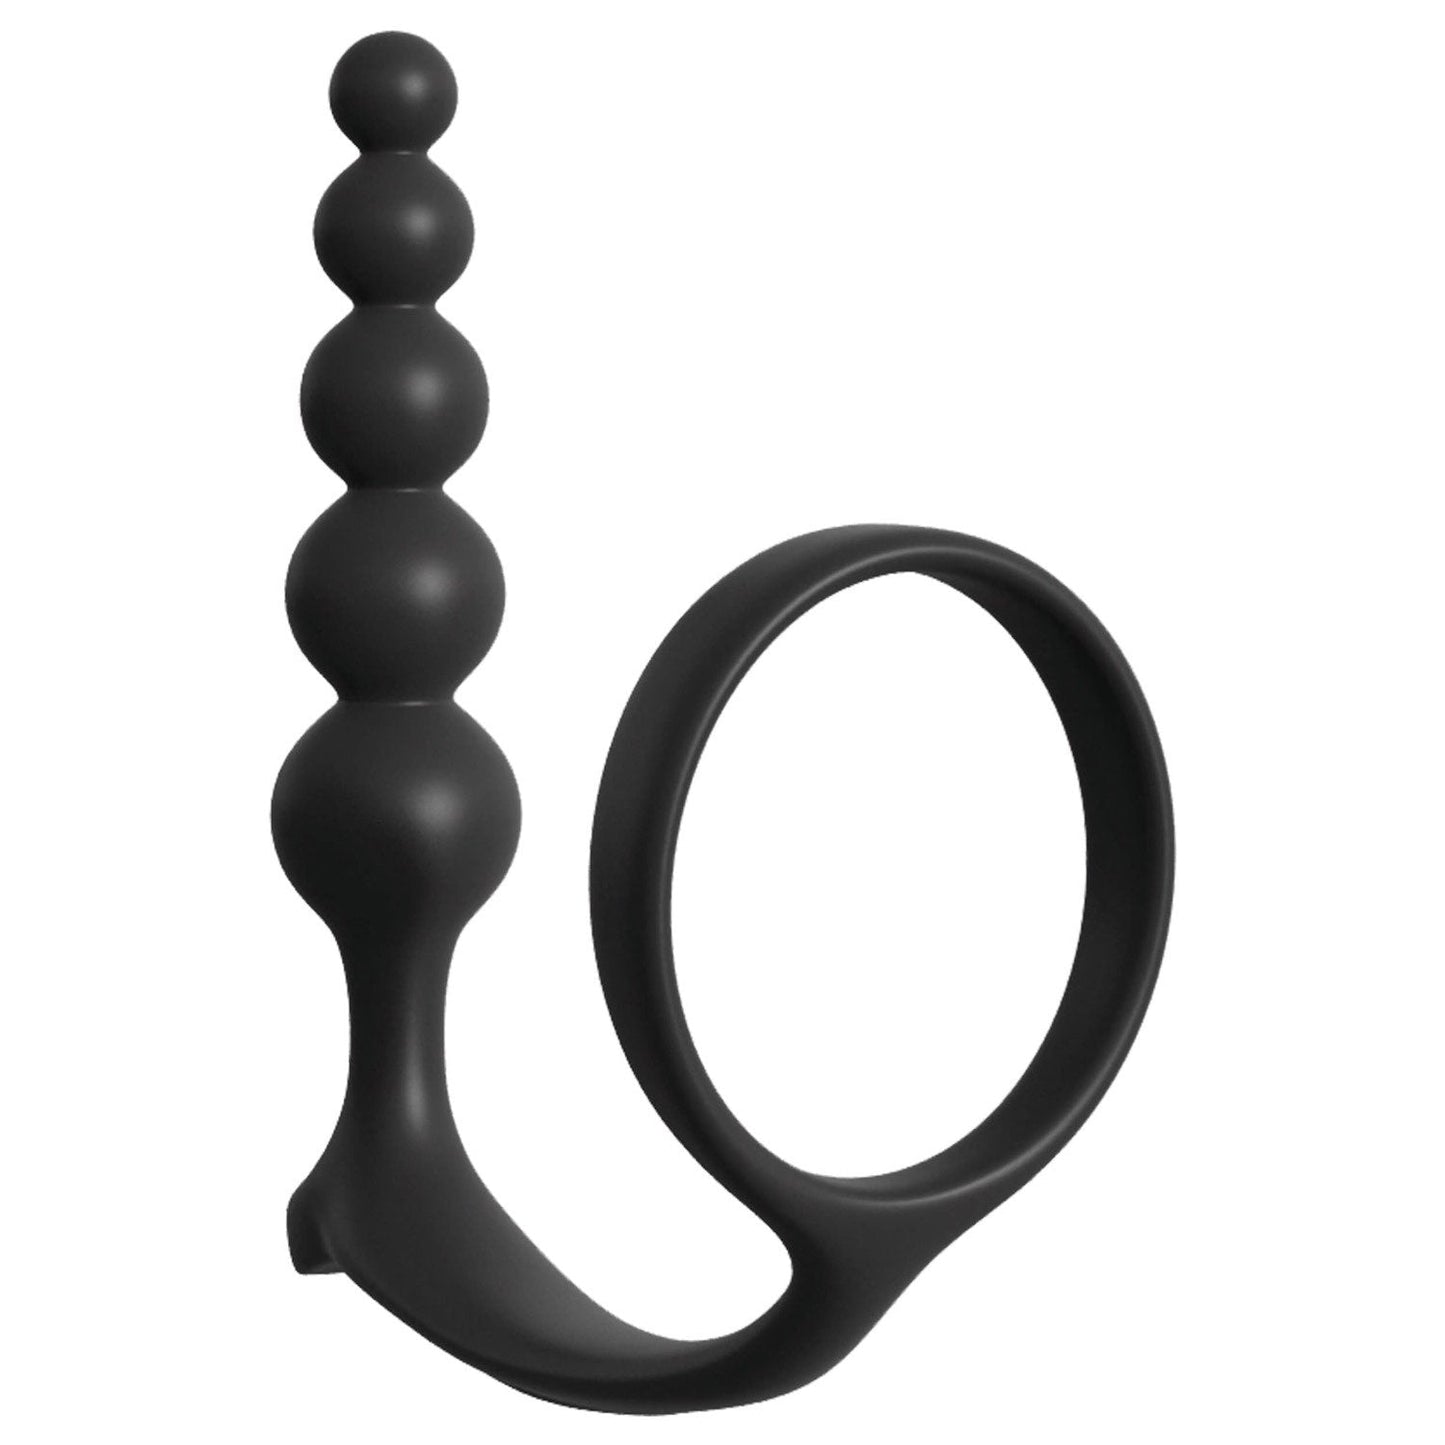 Ass-Gasm Cockring Anal Beads - Black Cock Ring with Anal Plug